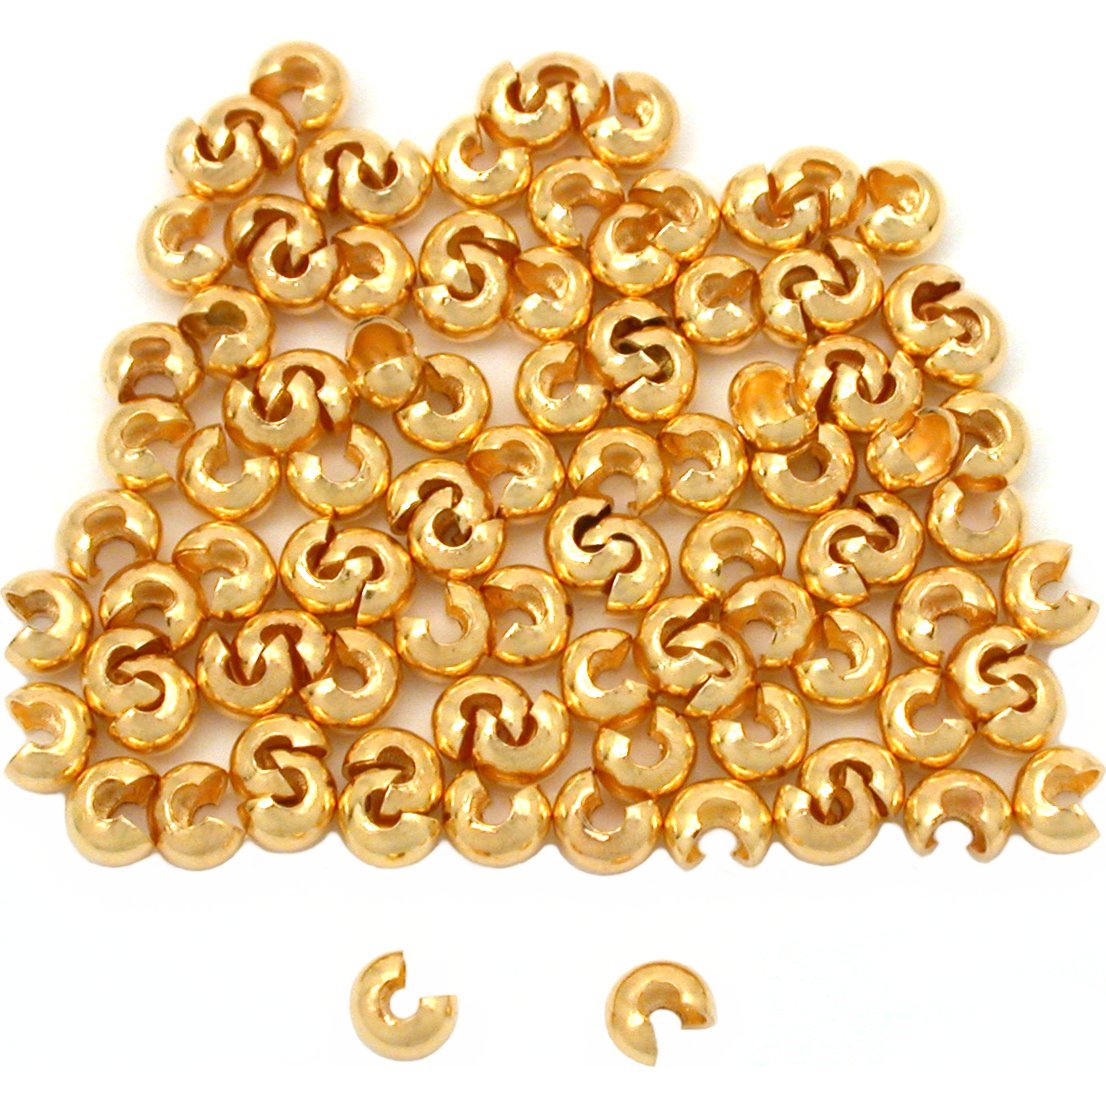 Primary image for 100 Real Gold Plated Crimp Bead Covers for Beading 3mm New